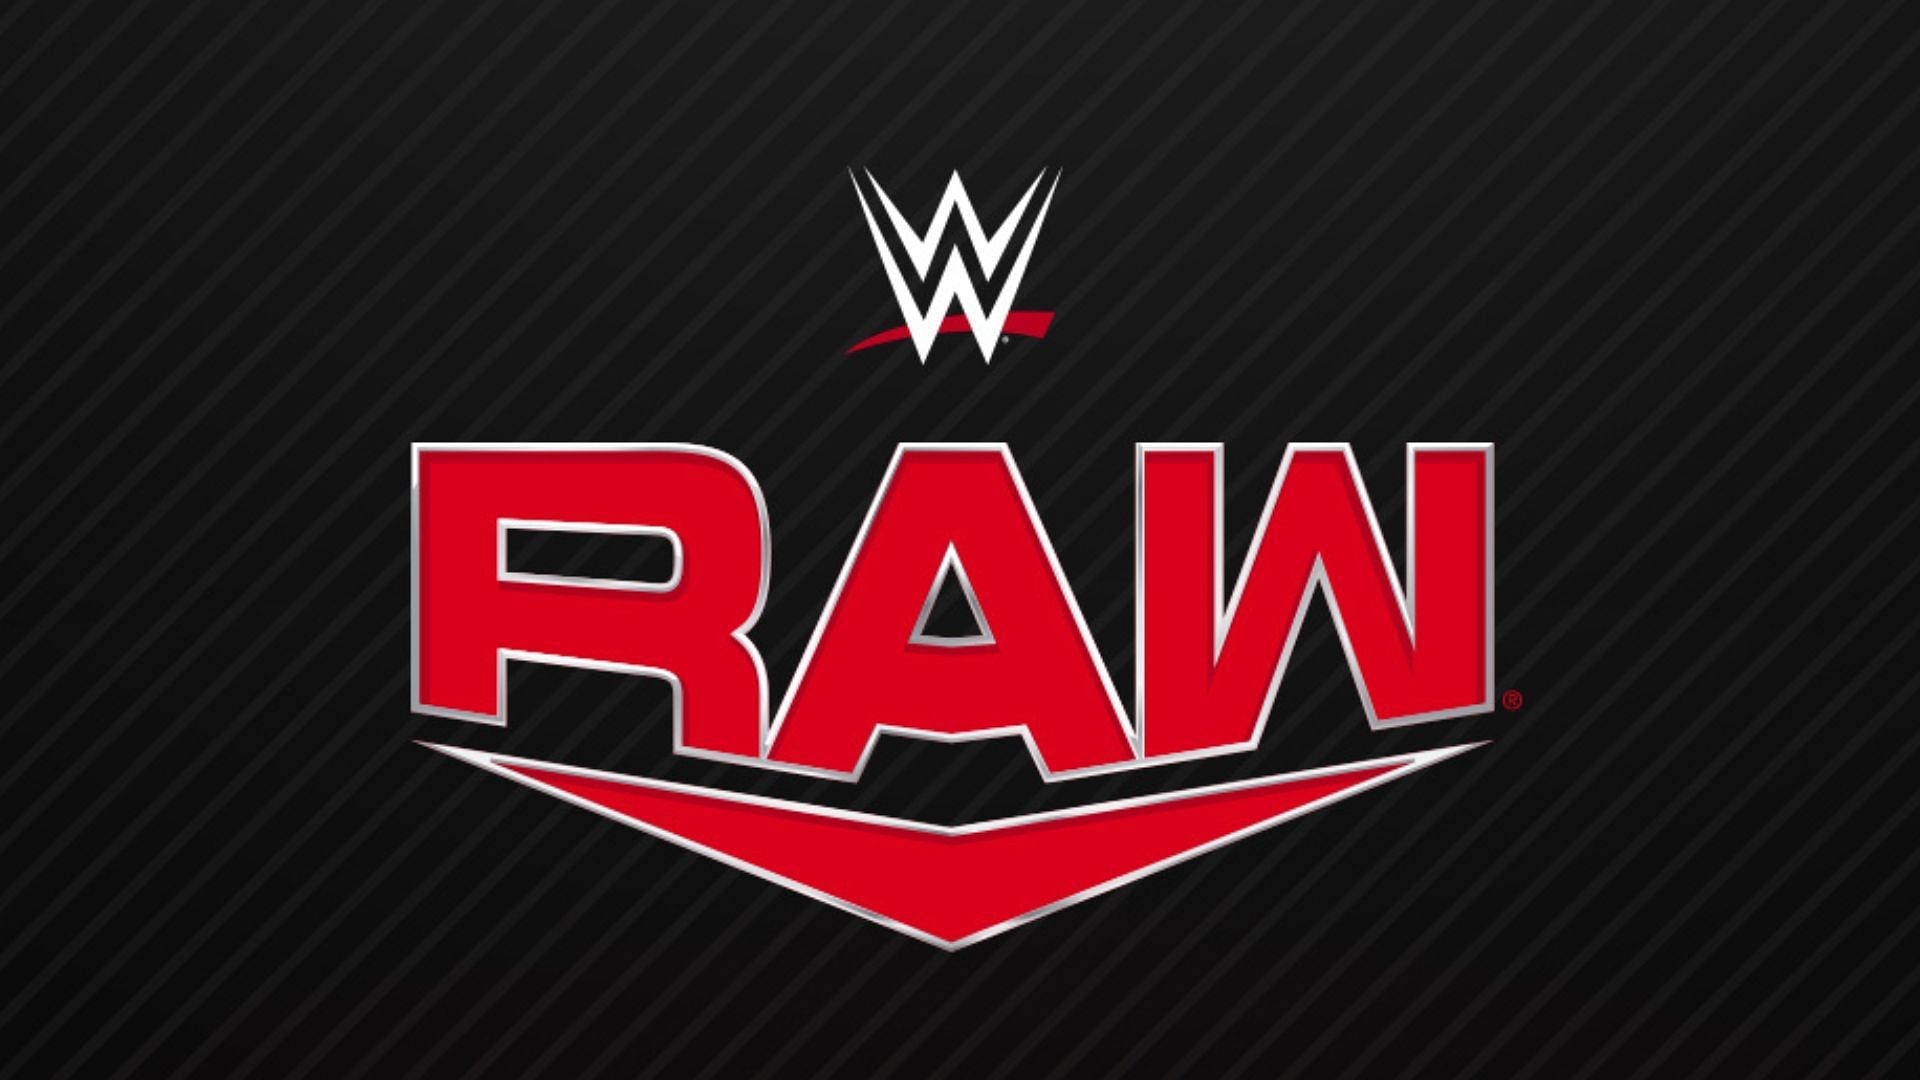 WWE RAW airs on Monday nights on the USA Network